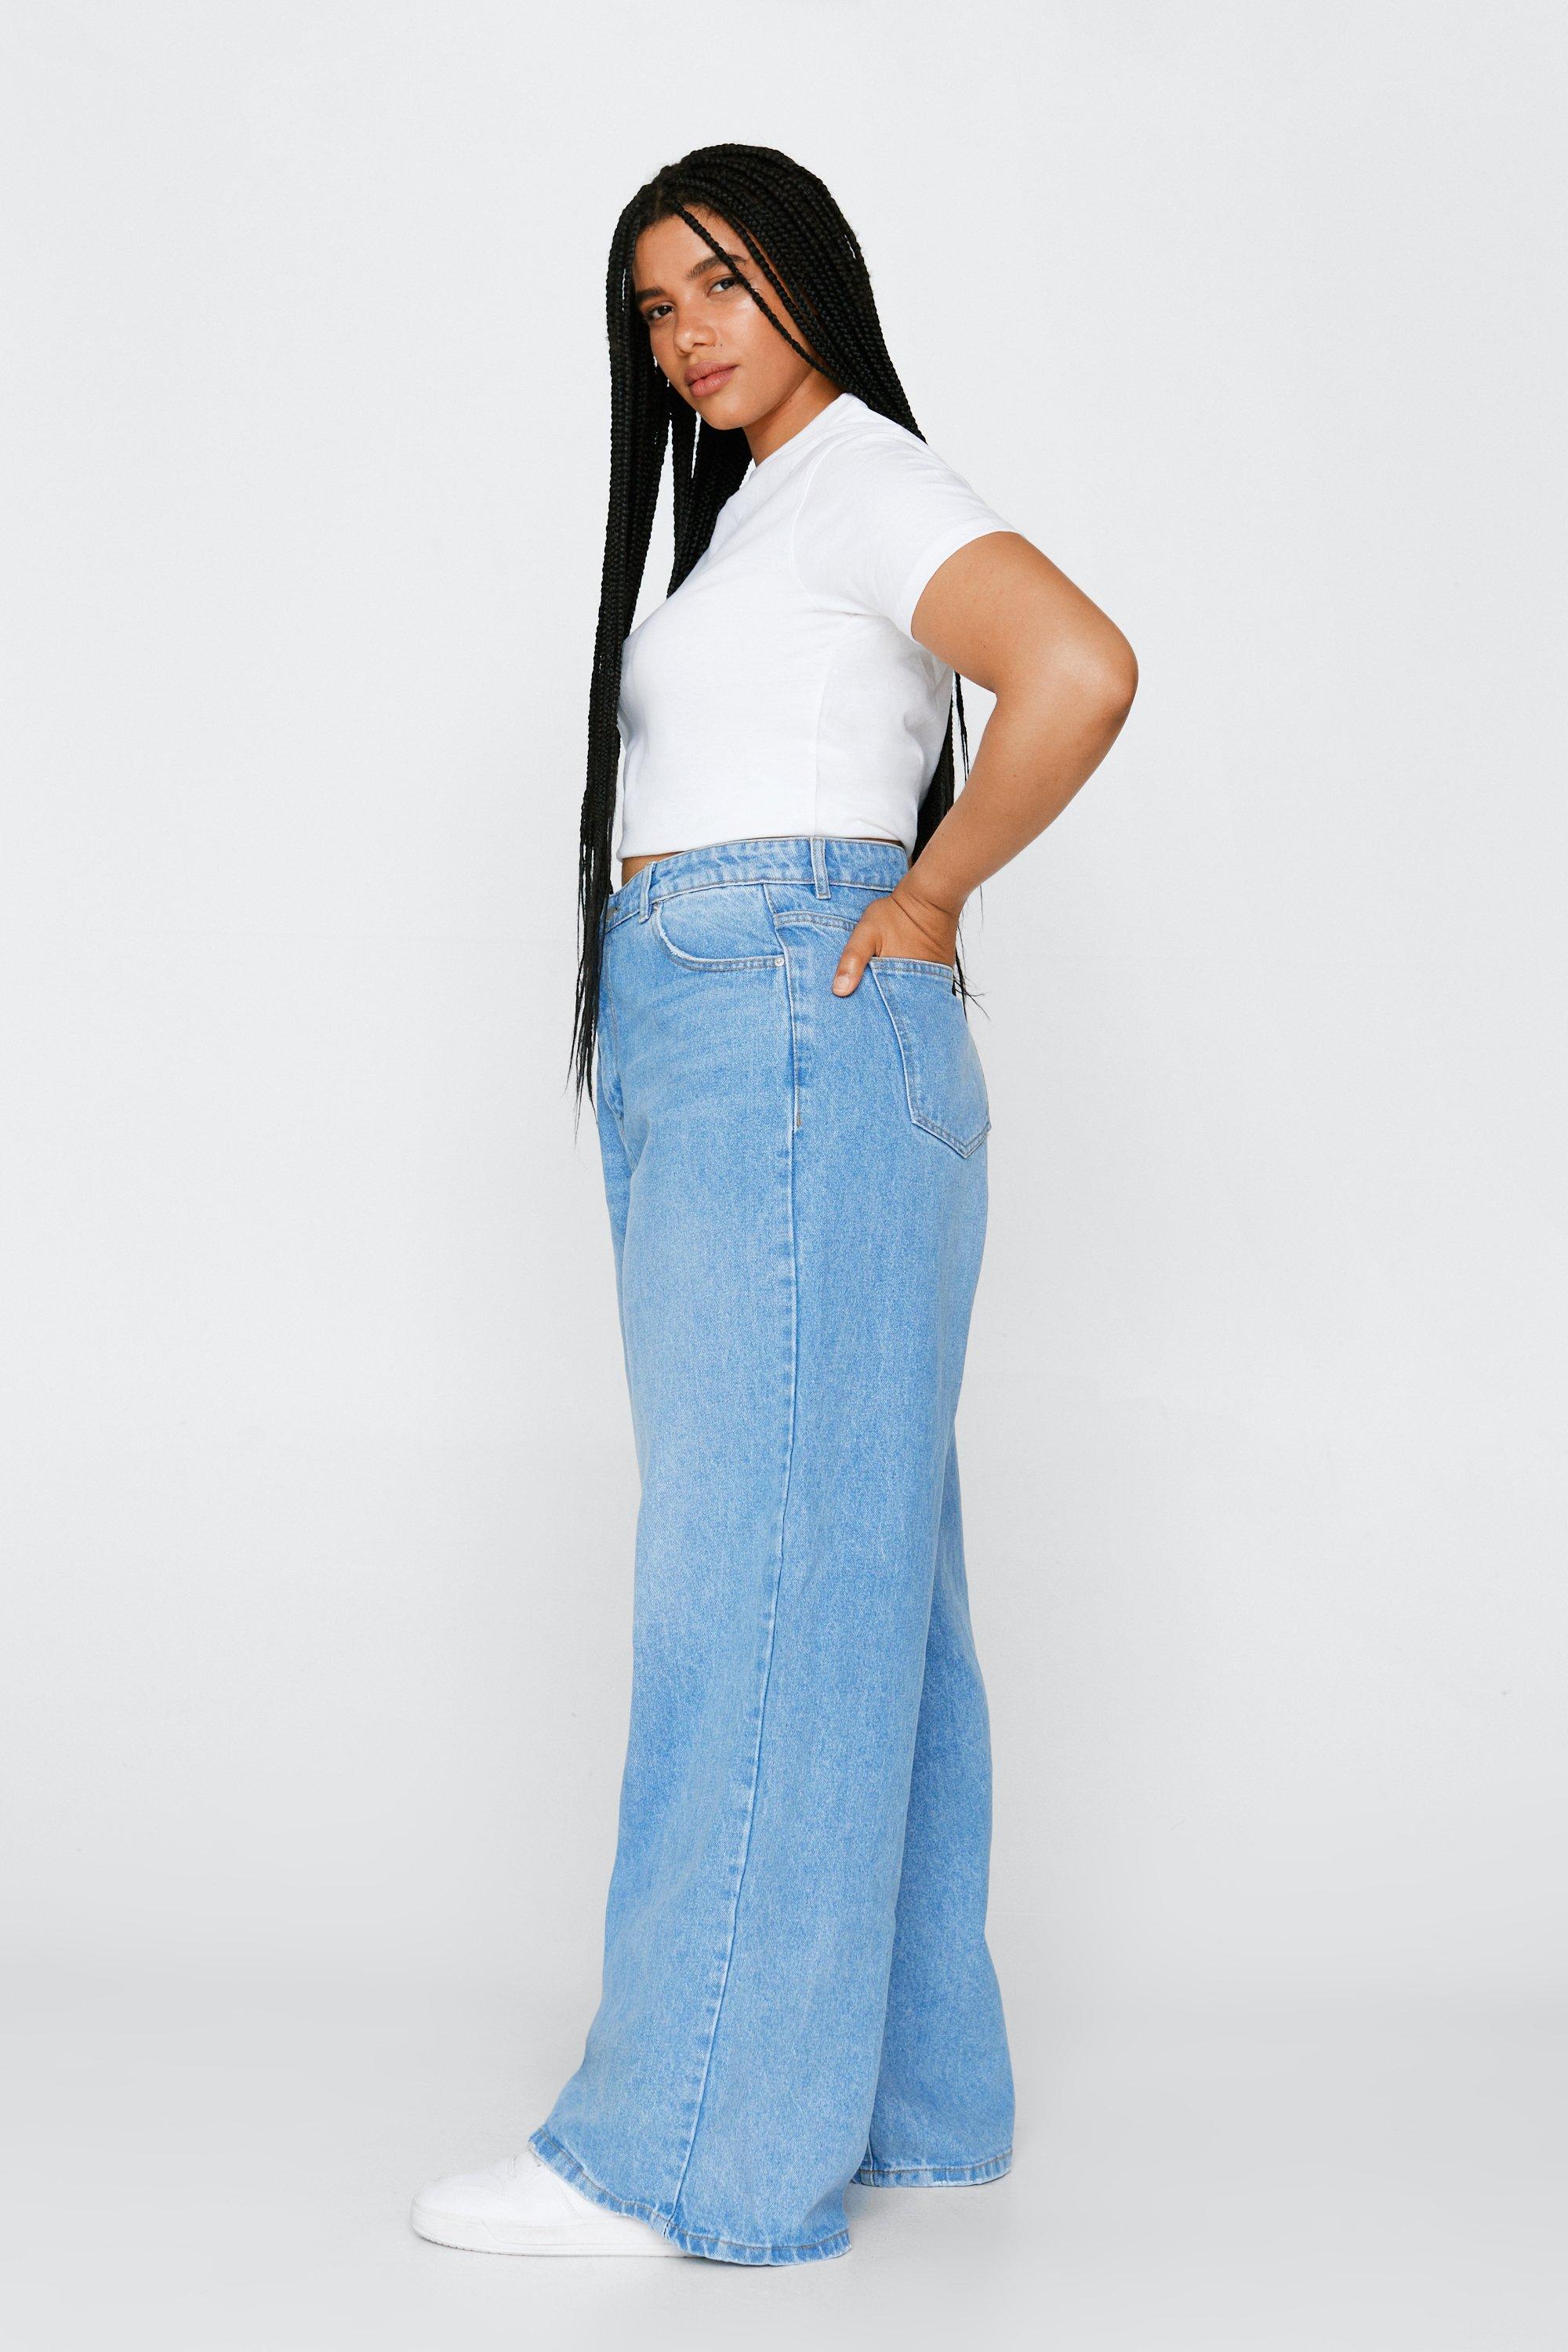 bawilom Womens Plus Size Flare Jeans High Waisted Baggy Wide Leg